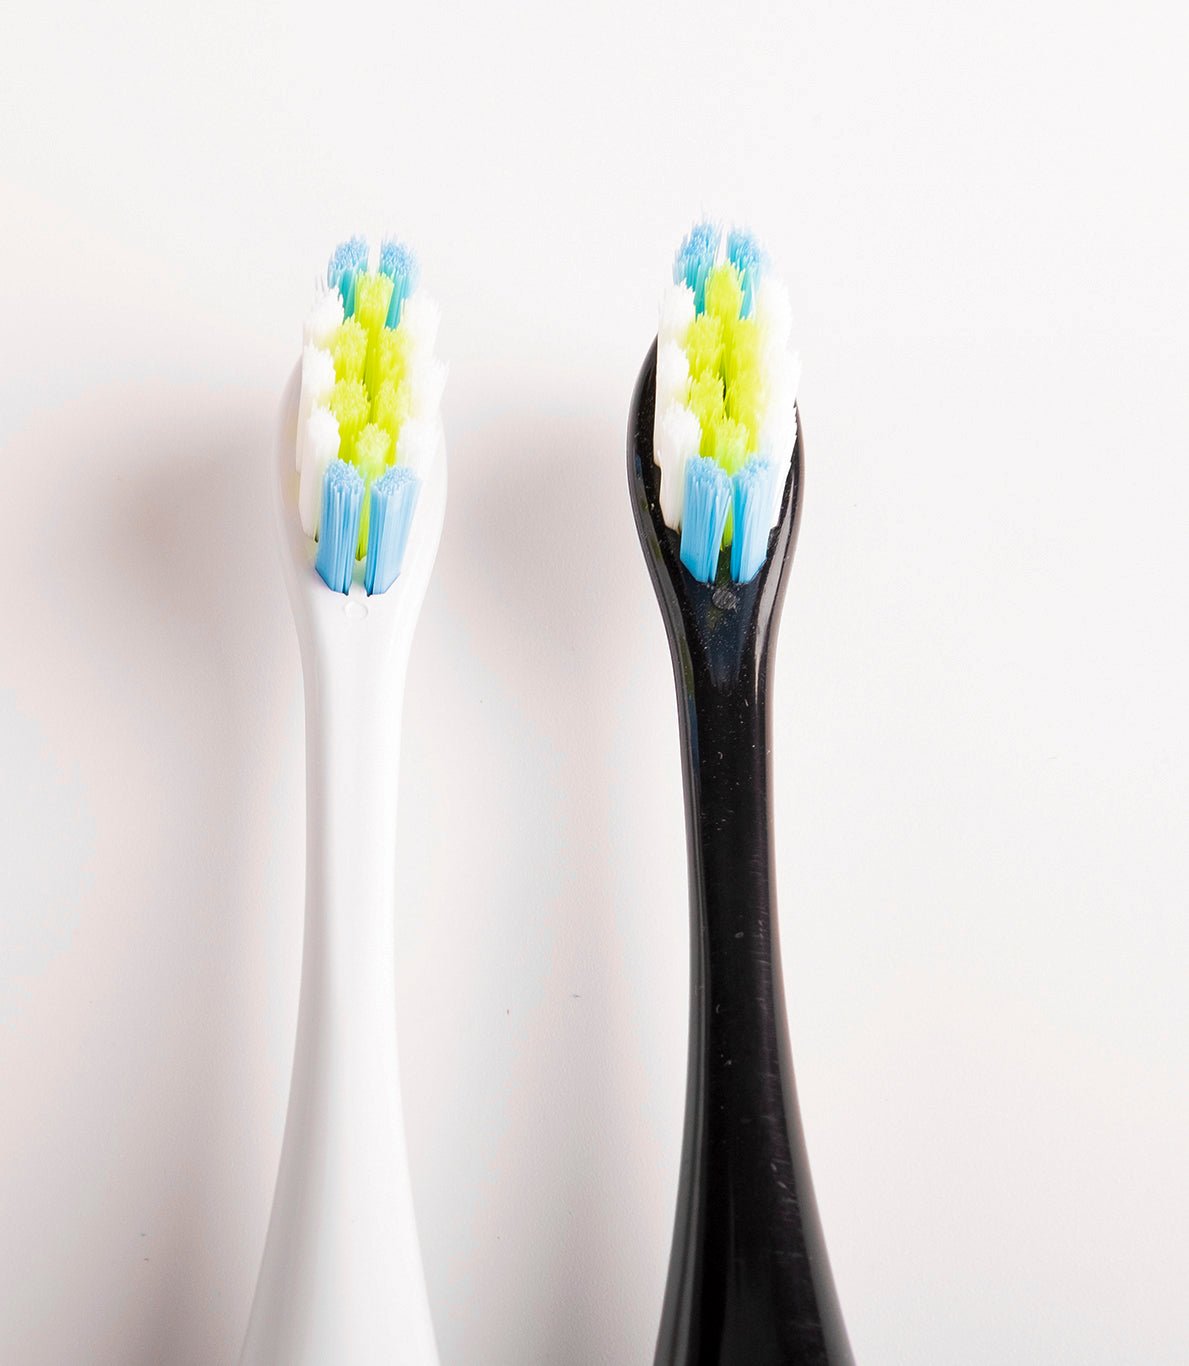 Oclean Toothbrush Head Replacements - starcopia design store